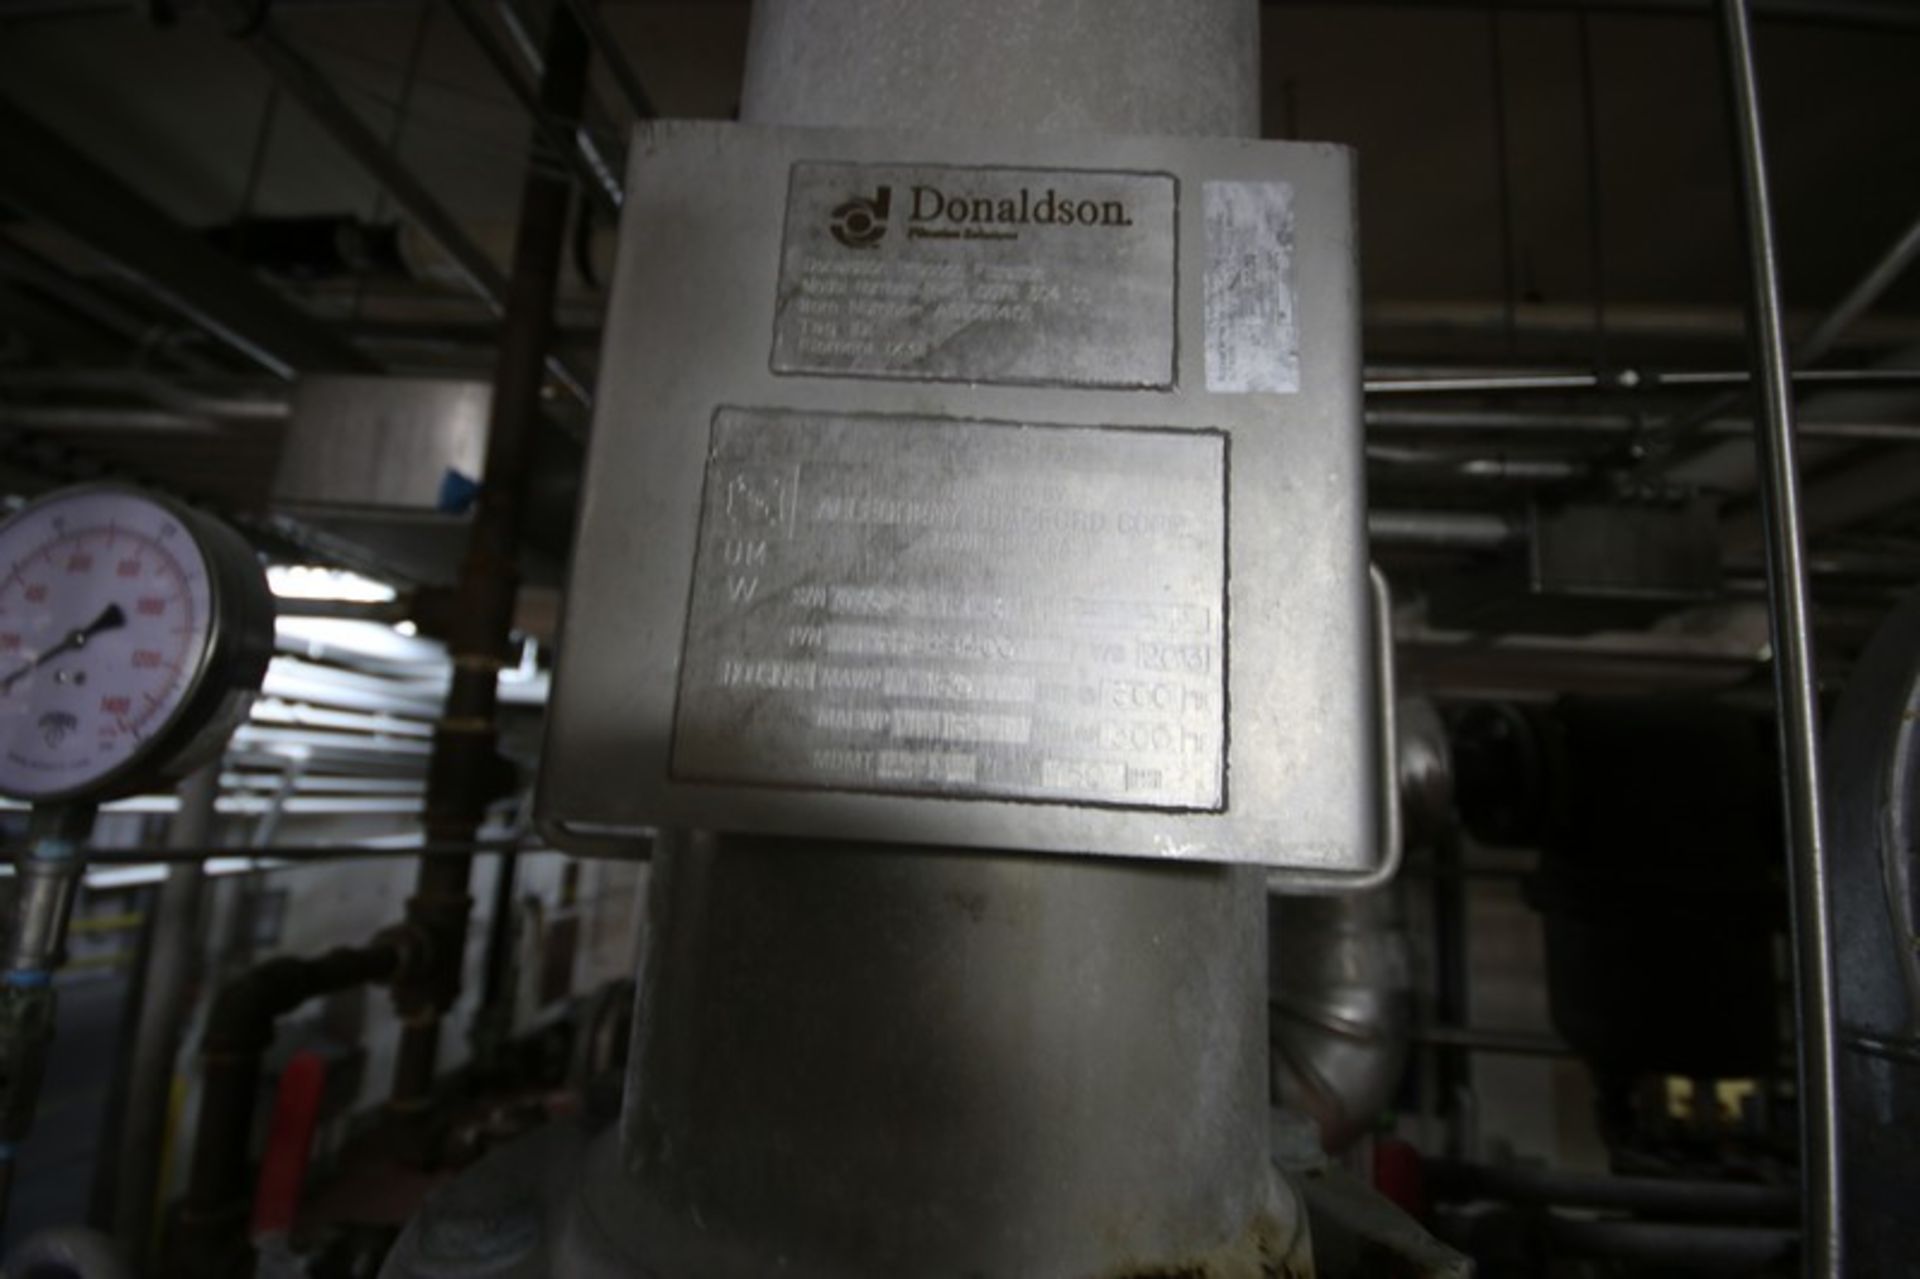 2013 Donaldson Steam Filter,S/N 036261-1-1-3, Housing MAWP 150 PSI @ 300 F, MDMT 20 F @ 150 PSI, - Image 3 of 3